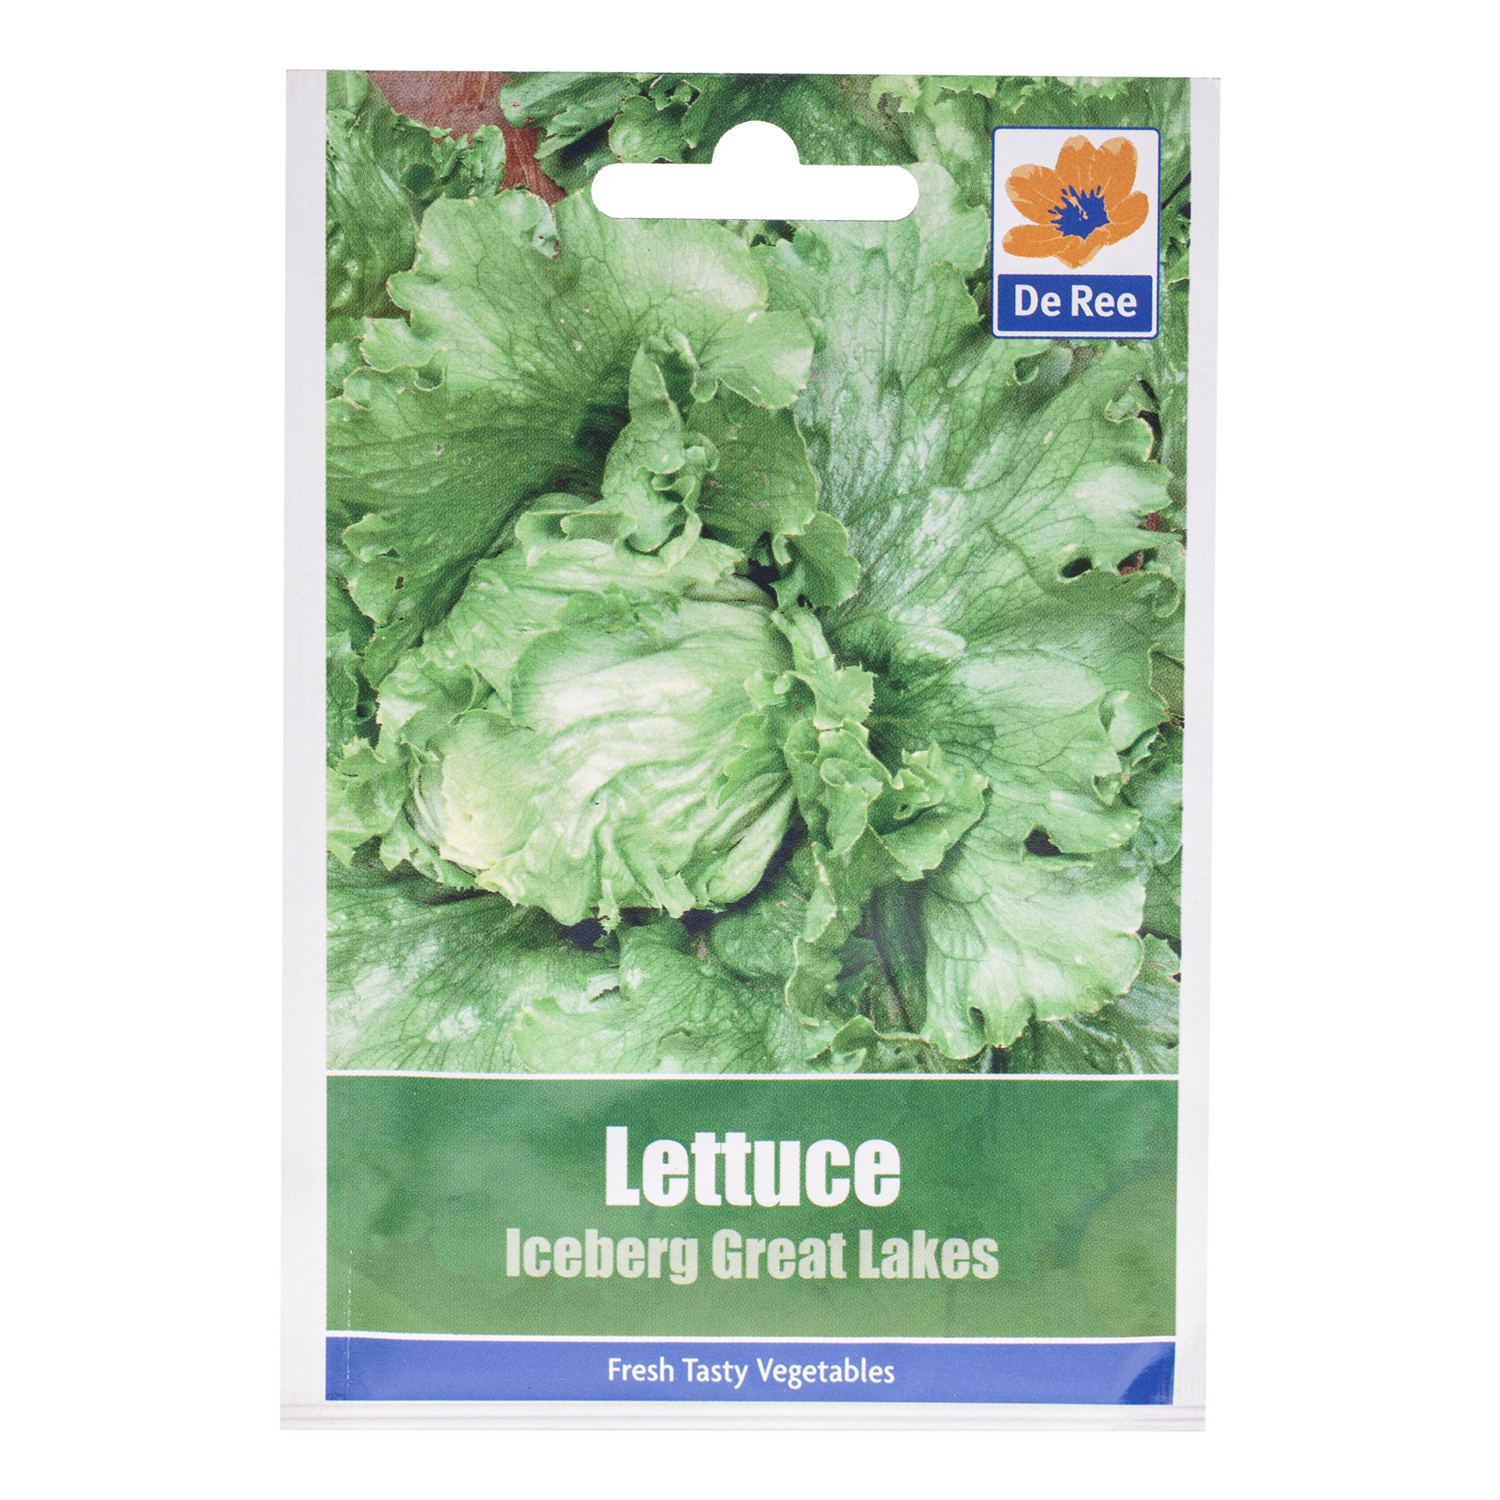 Iceberg Great Lakes Lettuce Seed Packet - Green Image